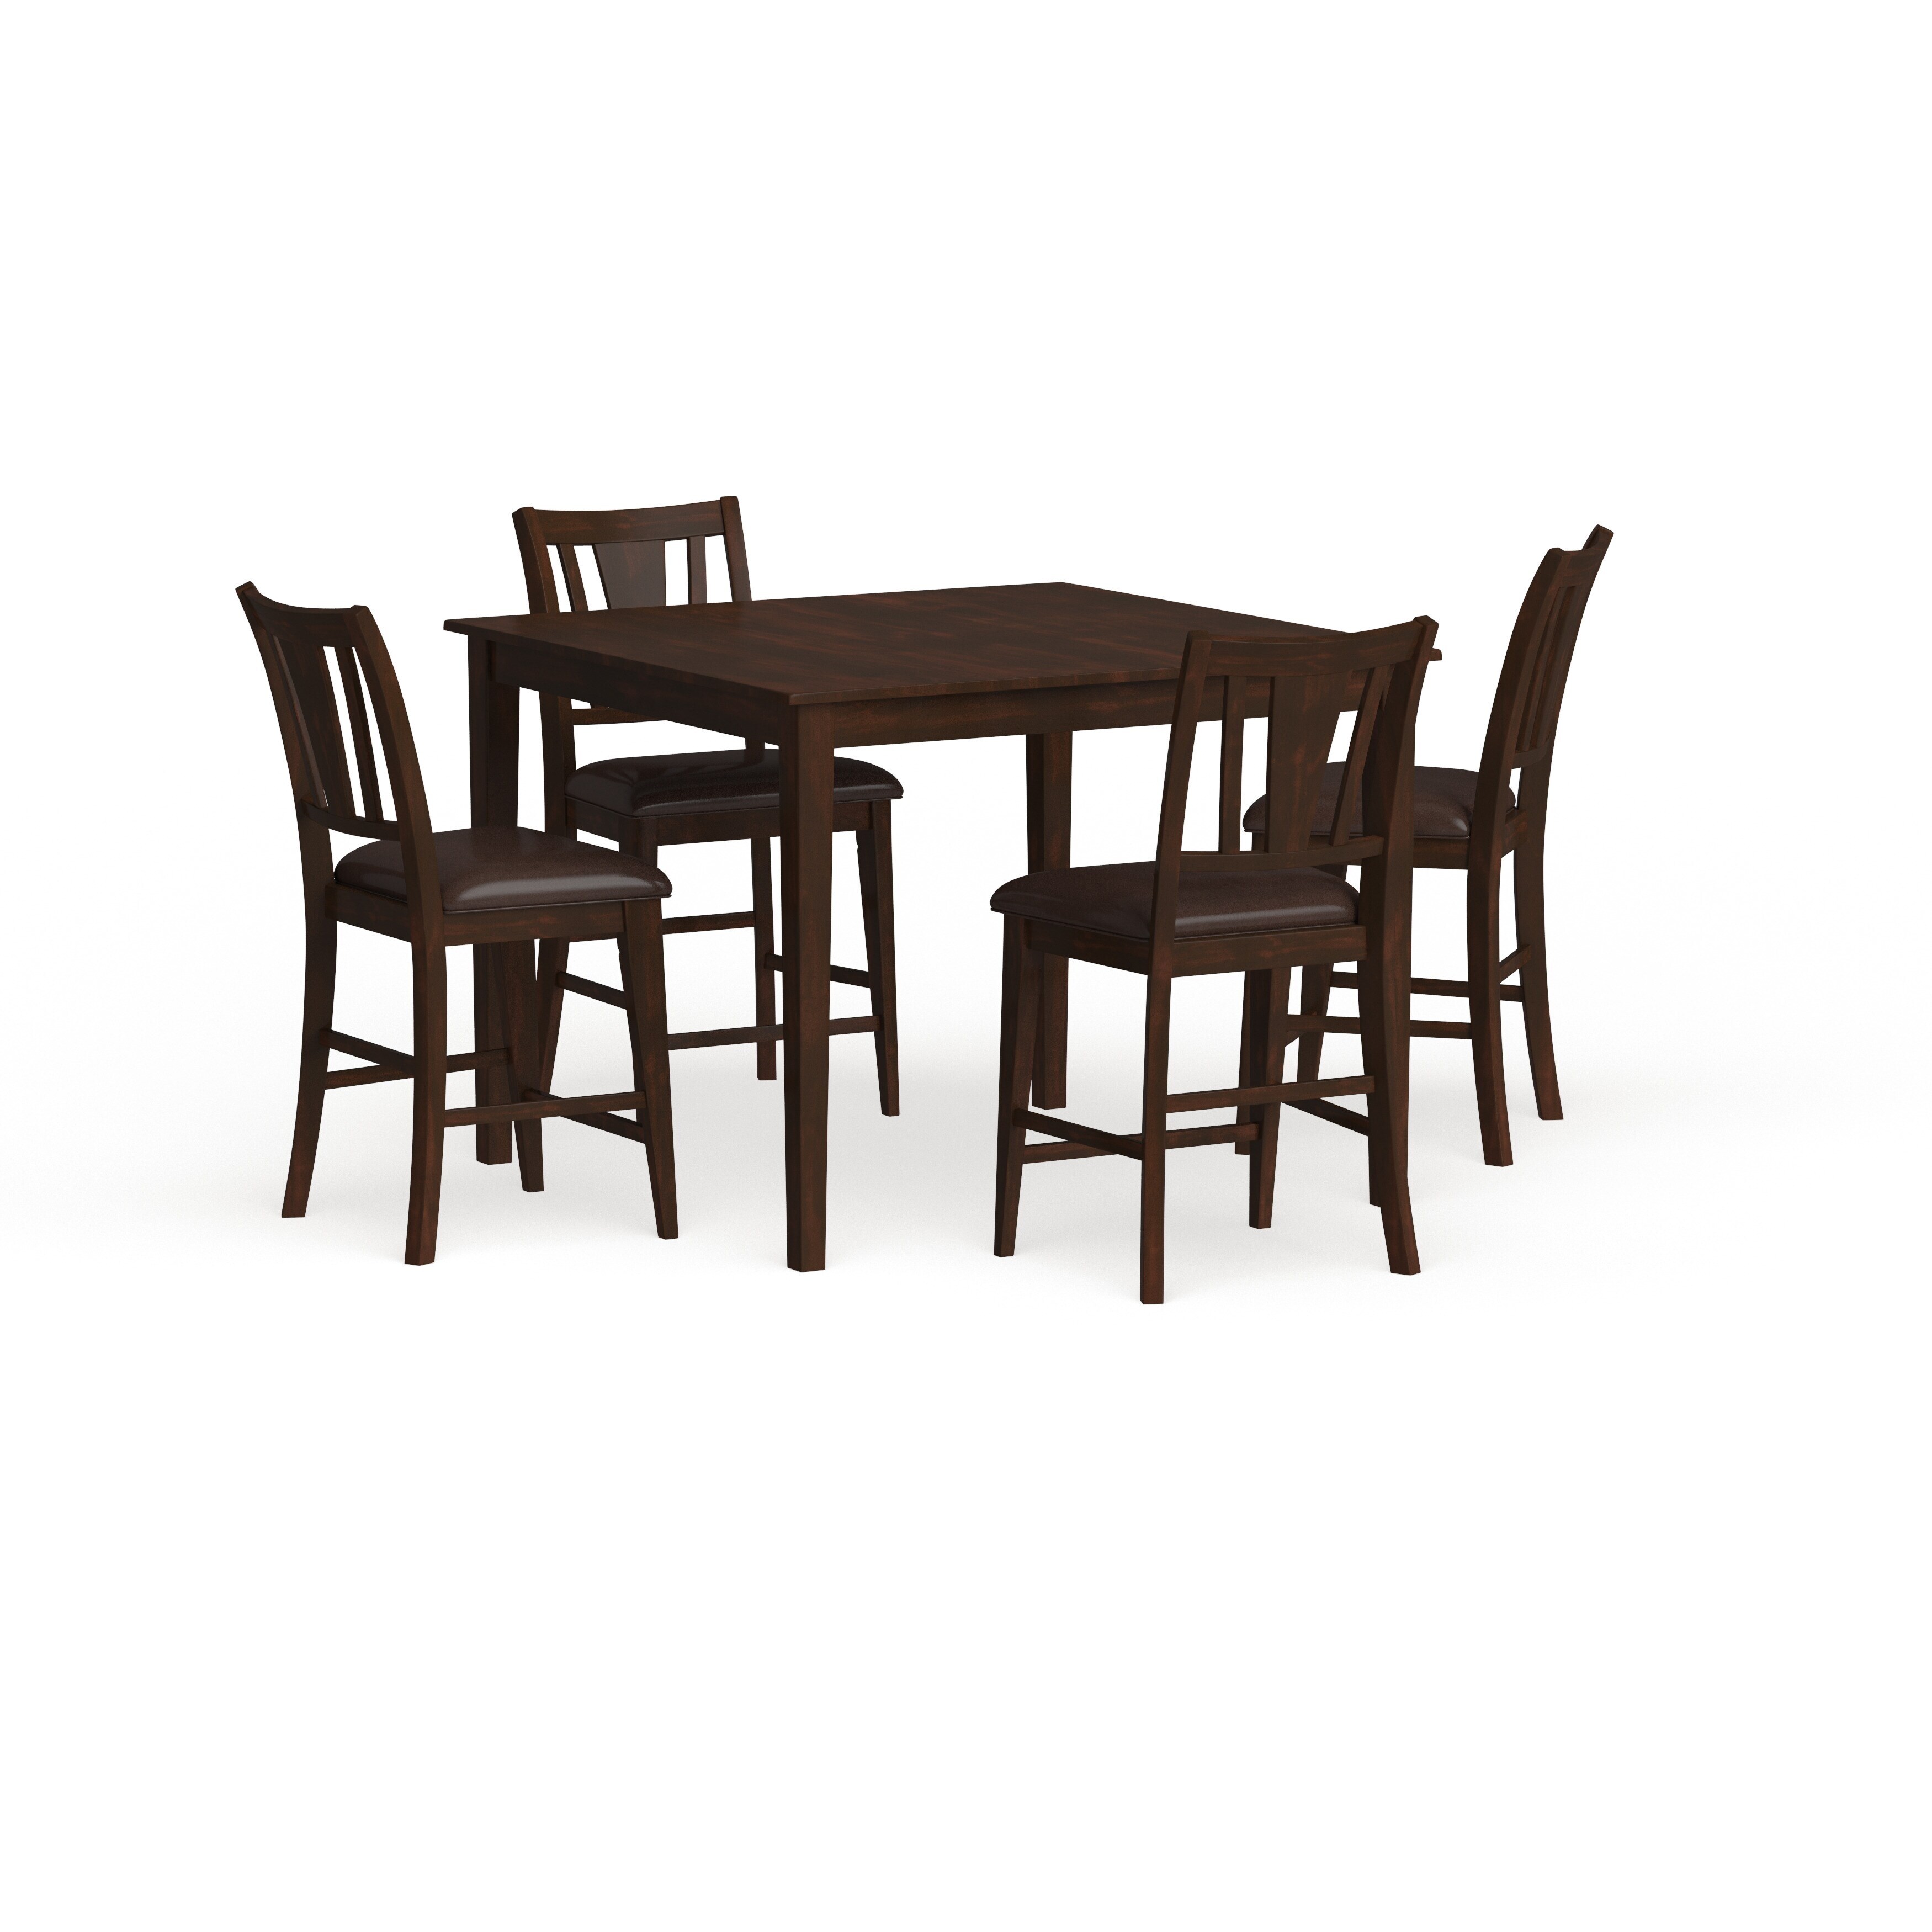 Vays Contemporary Expresso Wood 5-Piece Counter Height Dining Set by Furniture of America